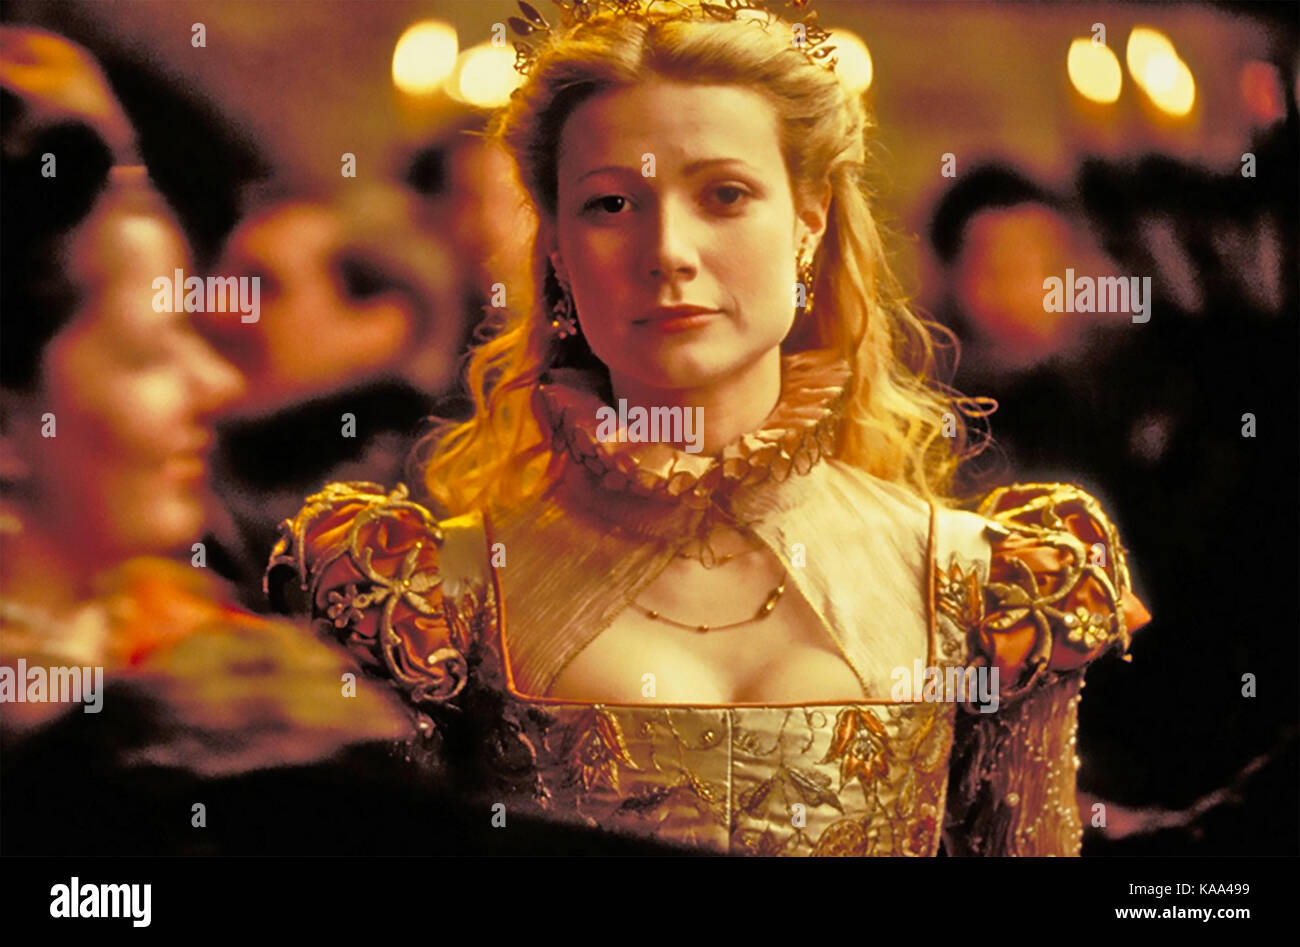 SHAKESPEARE IN AMORE 1998 Universal Pictures film con Gwyneth Paltrow Foto Stock